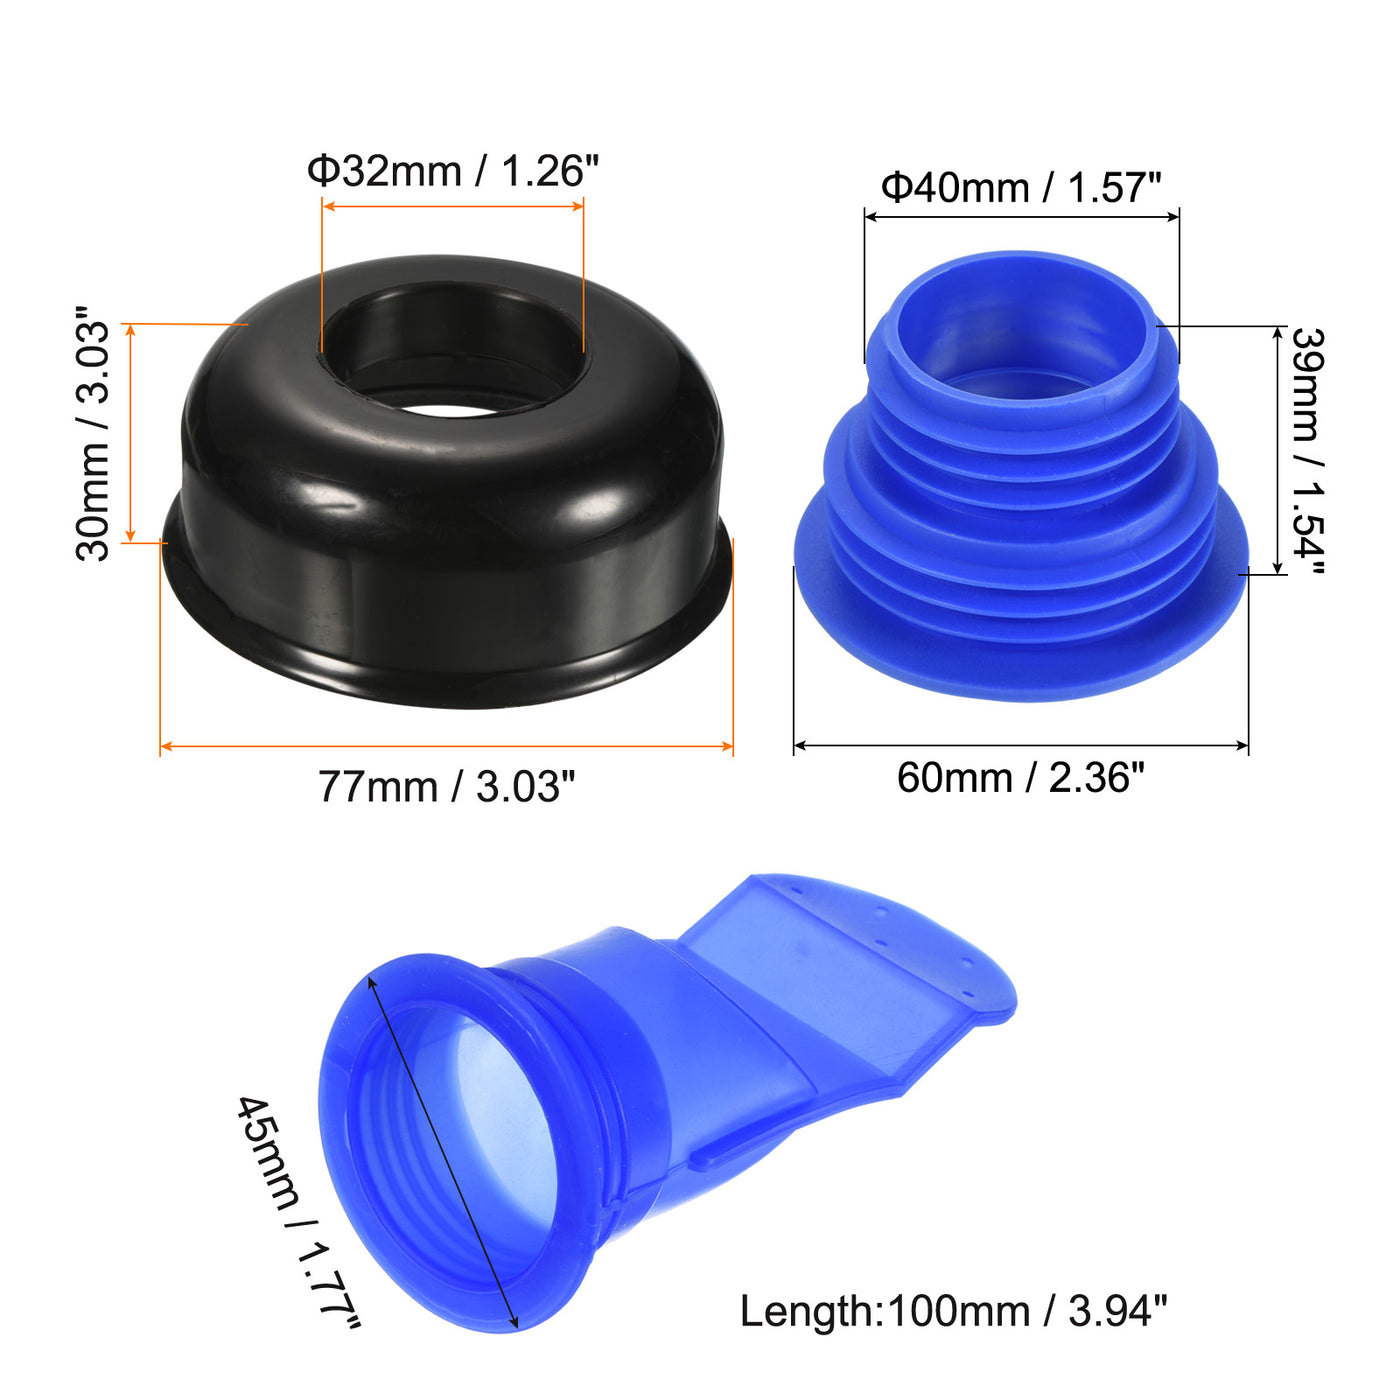 Harfington Sewer Drain Pipe Sealing Plug Silicone Hose Stopper with Black Decorative Cover and Blue Anti-odor Core for Kitchen Bathroom, 1 Set